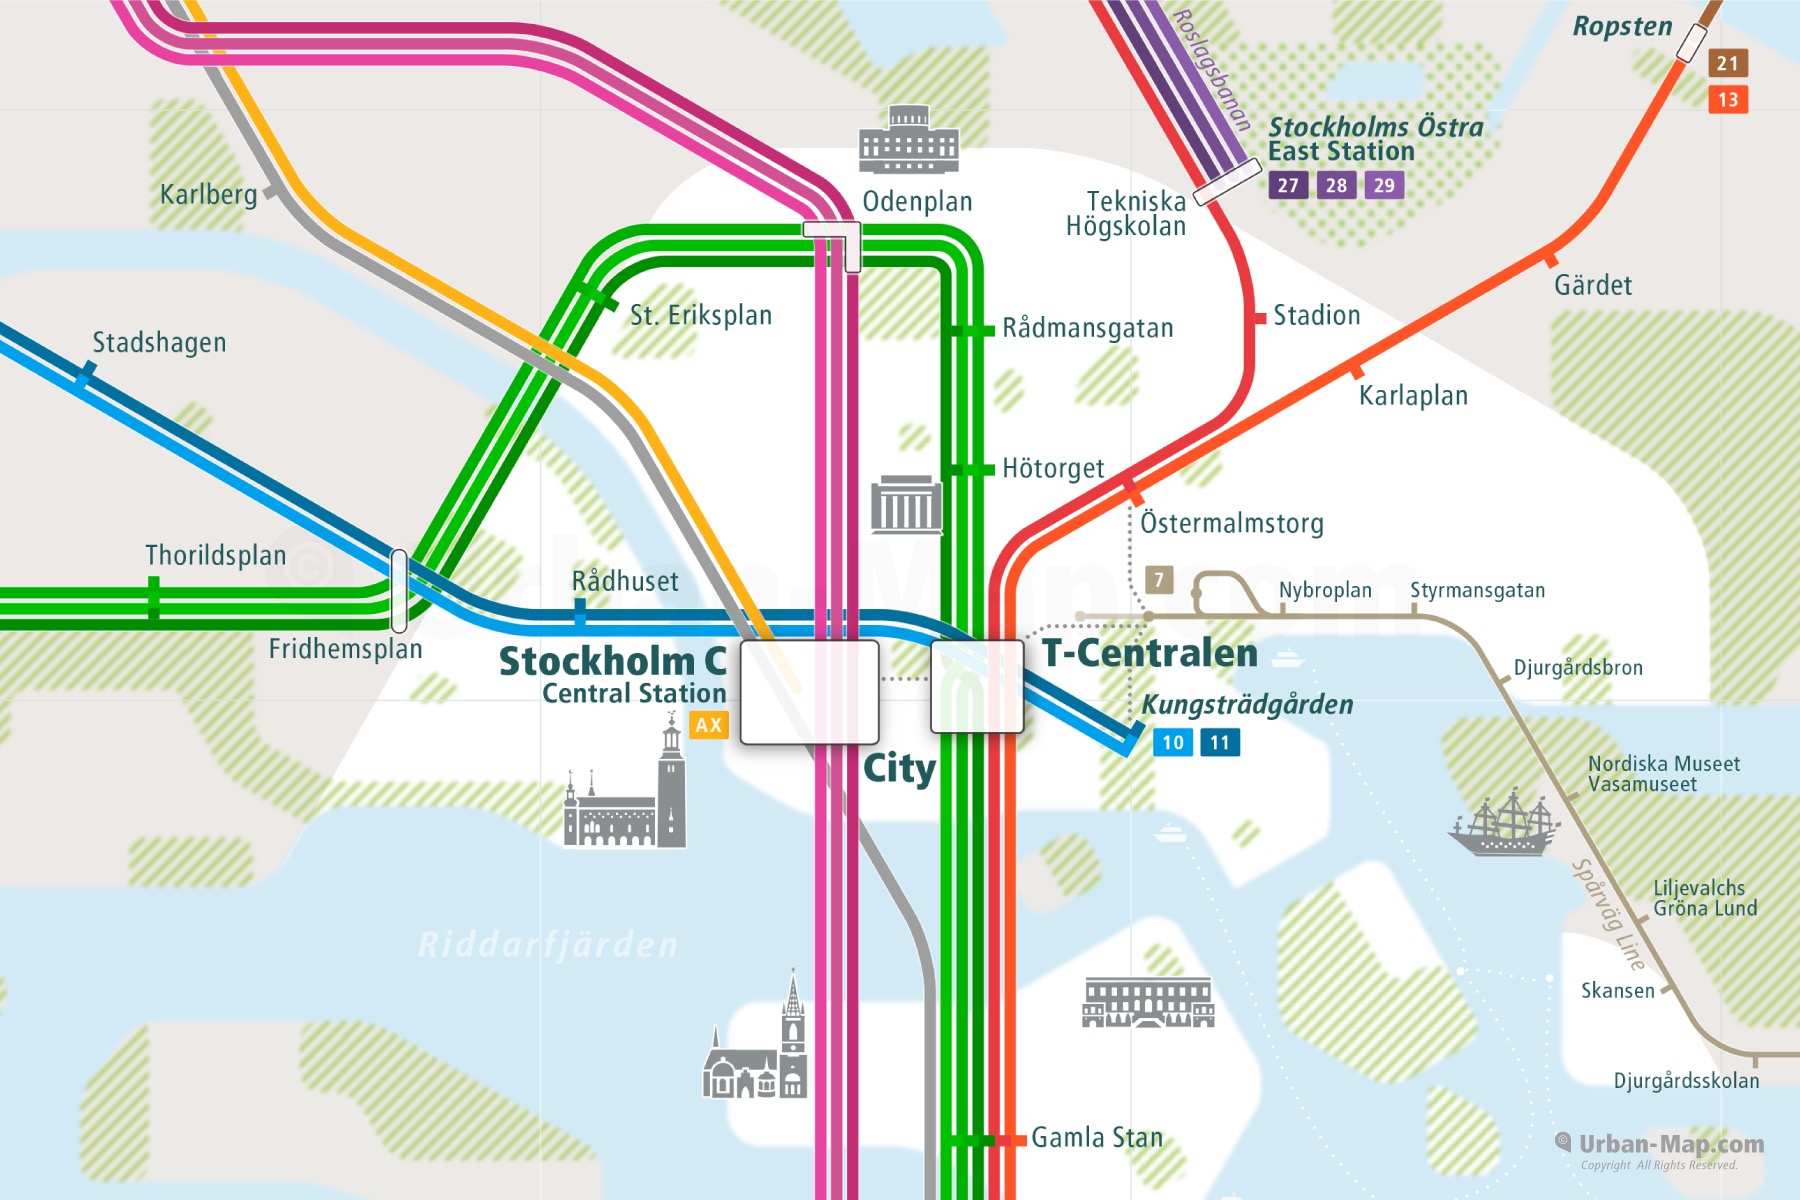 Stockholm City Rail Map shows the train and public transportation routes of Metro, Tram, Light Rail, Commuter Rail and Arlanda Express Airport Link and Central Station, City and T-Centralen